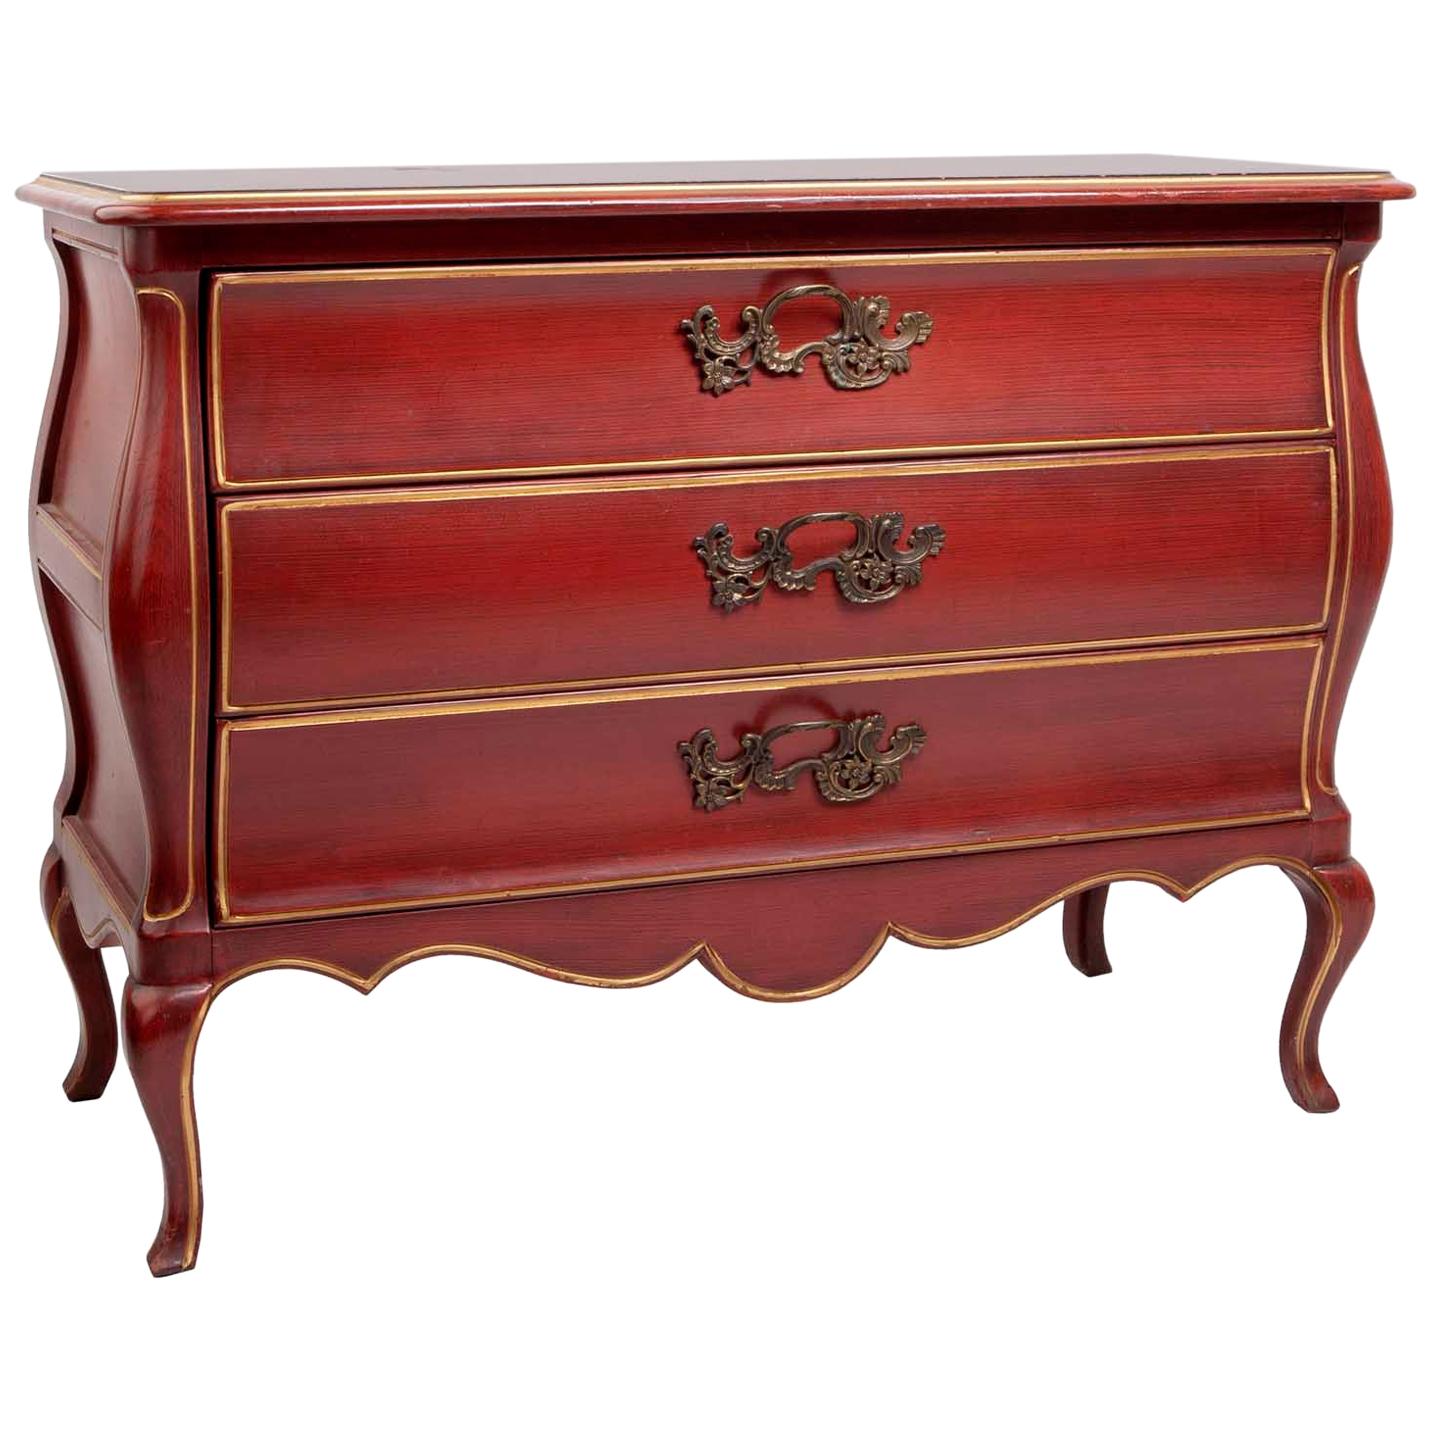 Midcentury, Chinoiserie Style, Red Lingerie Chest of Drawers with Gold Trim For Sale